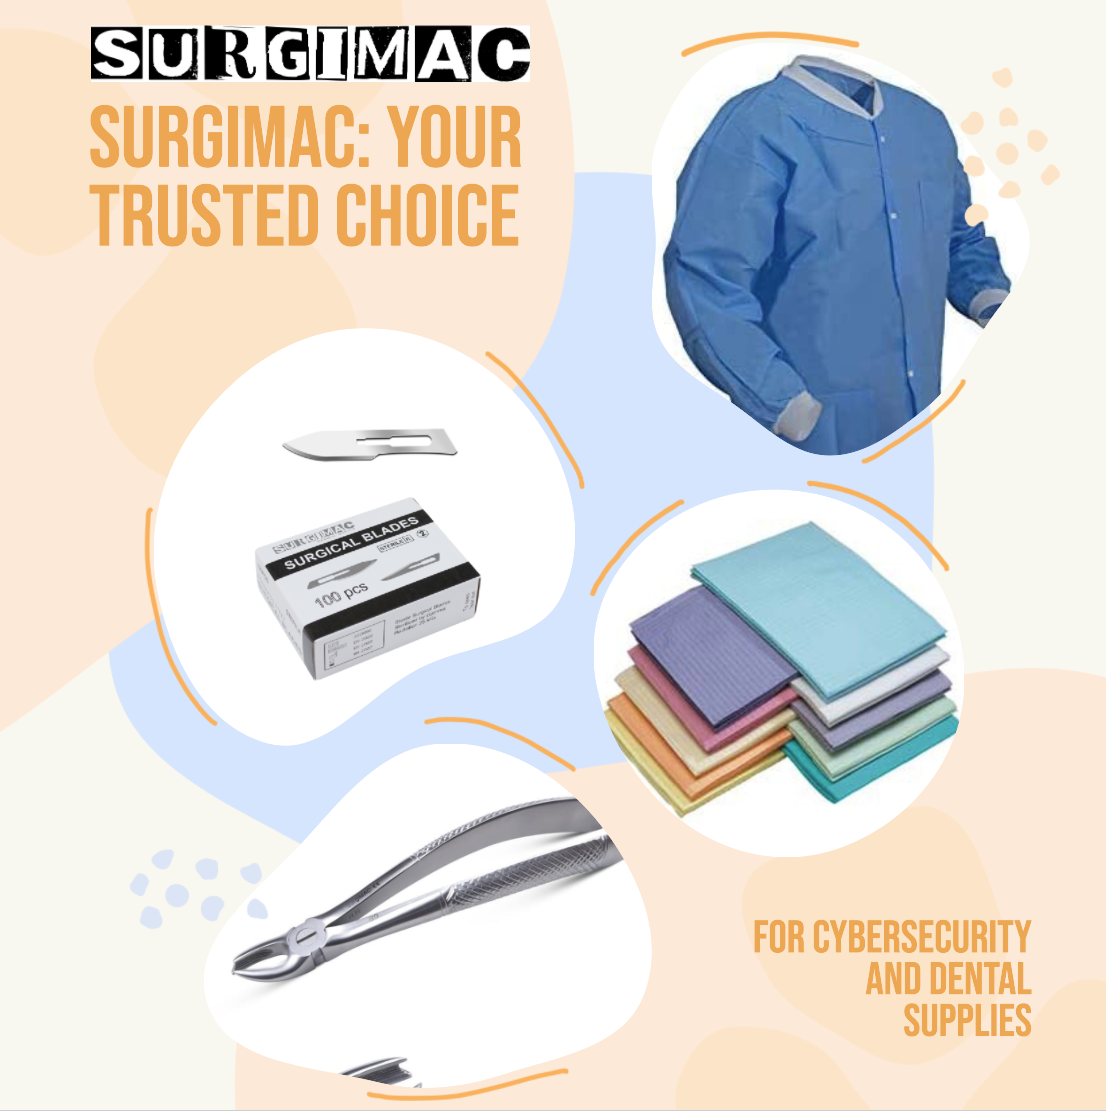 Cybersecurity and Dental Supplies: Why SurgiMac Is Your Trusted Choice | SurgiMac